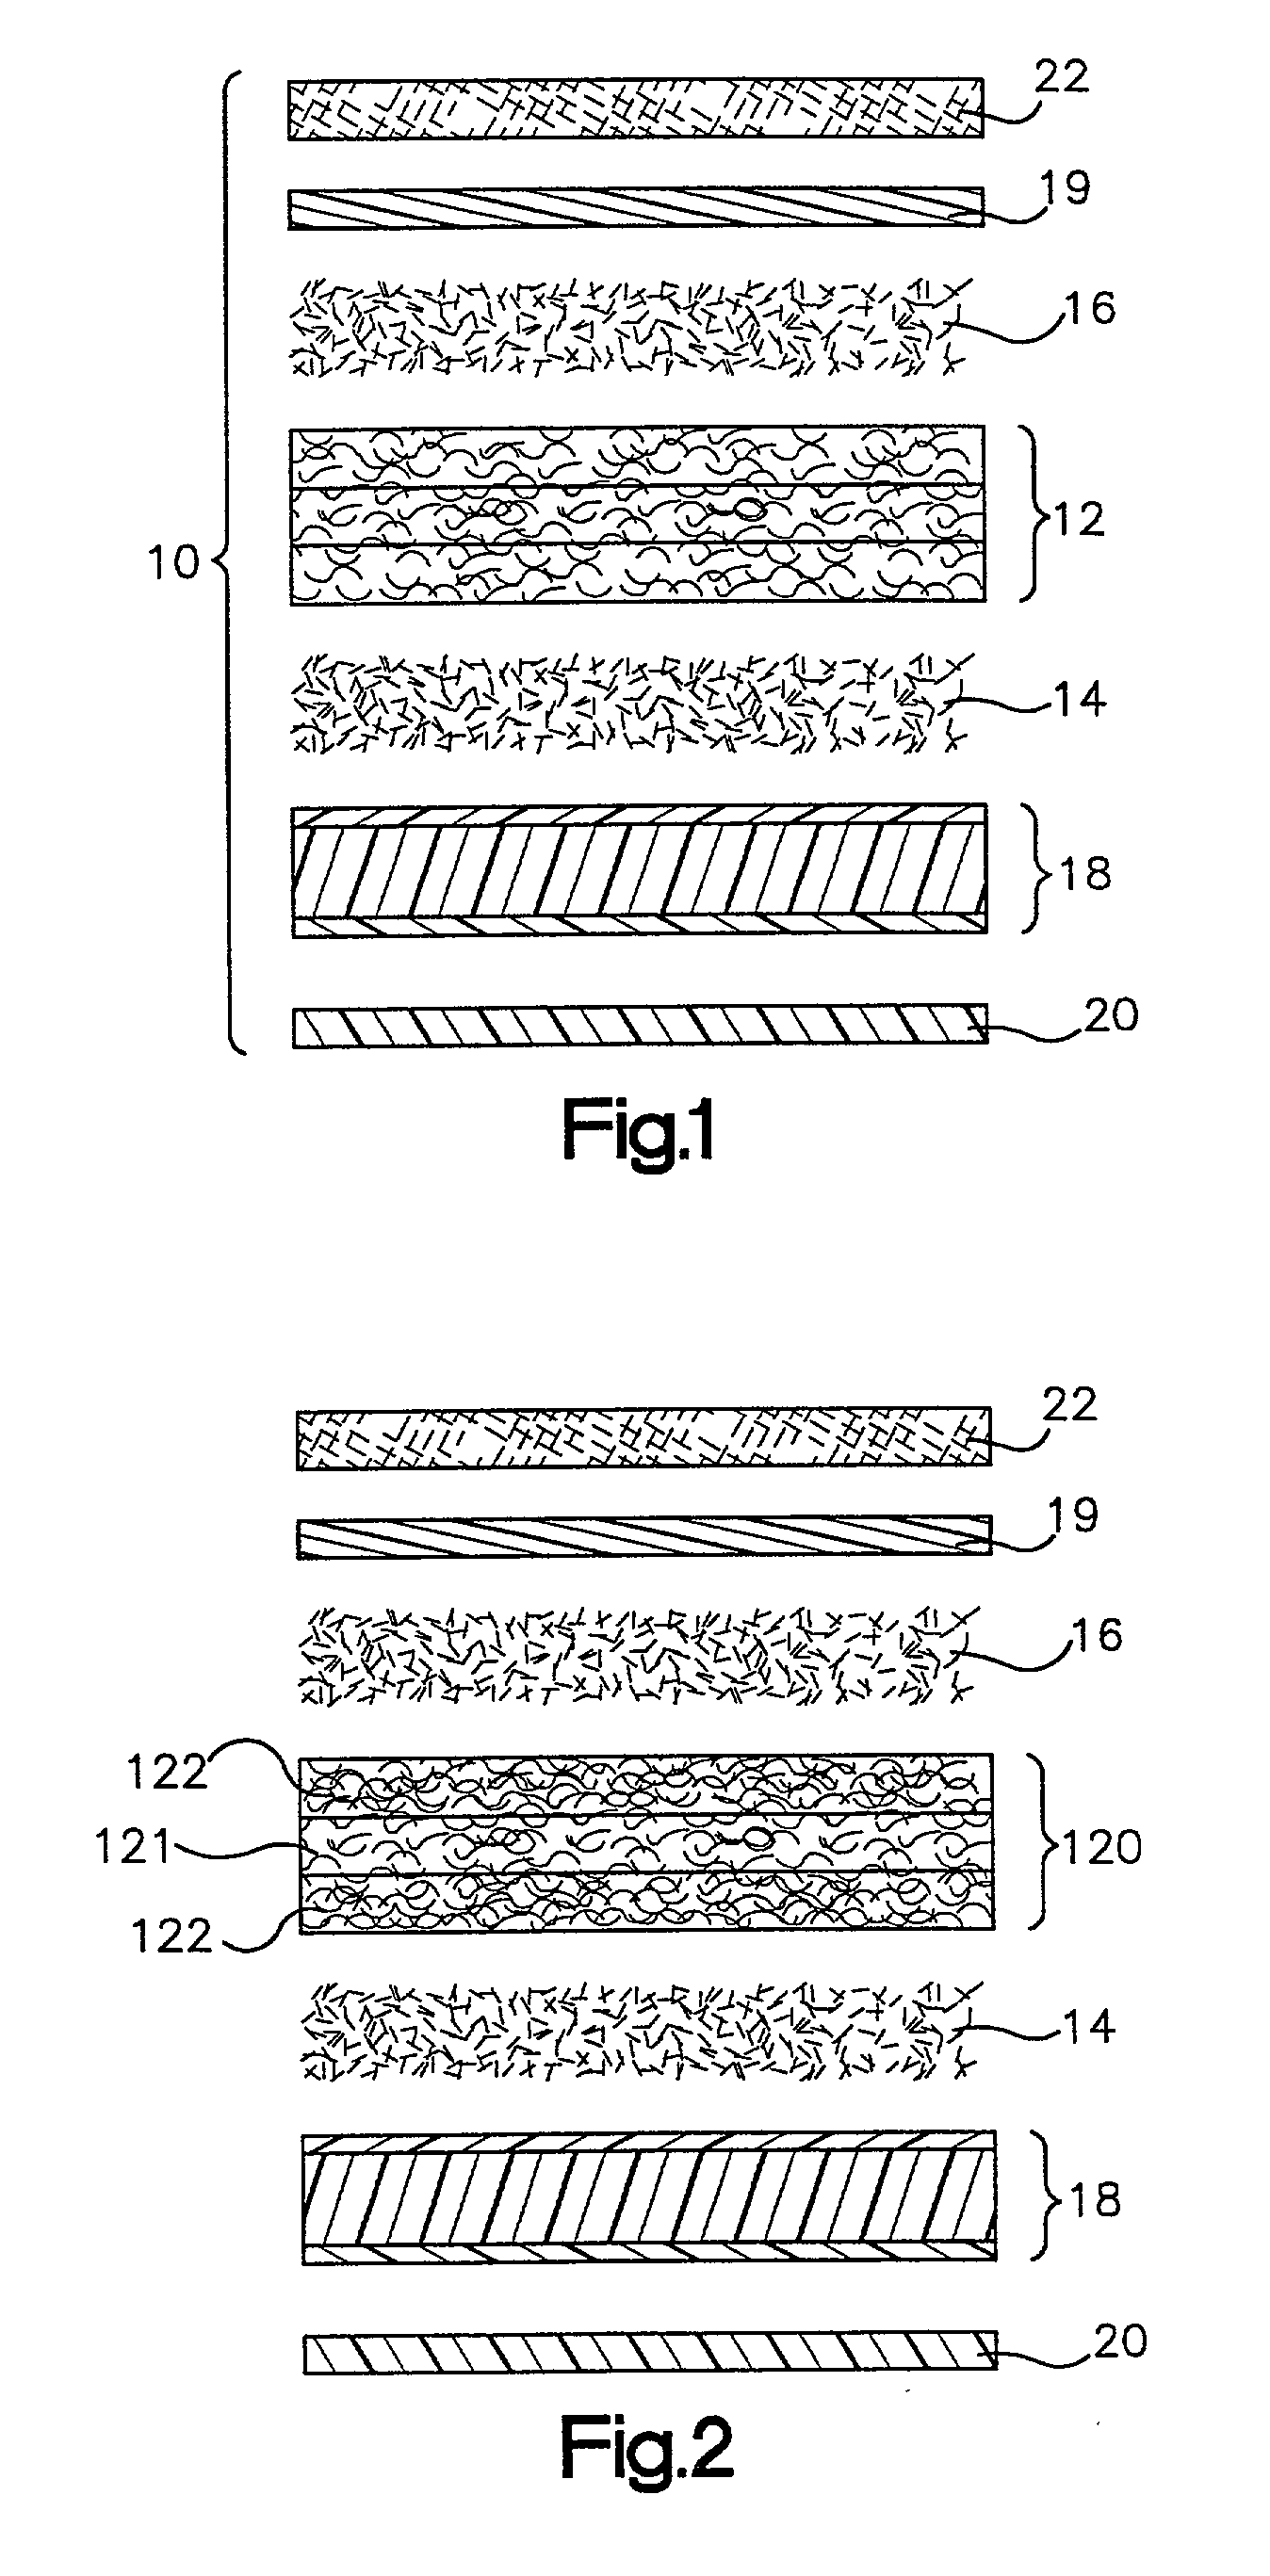 Laminated structures with multiple denier polyester core fibers, randomly oriented reinforcement fibers, and methods of manufacture